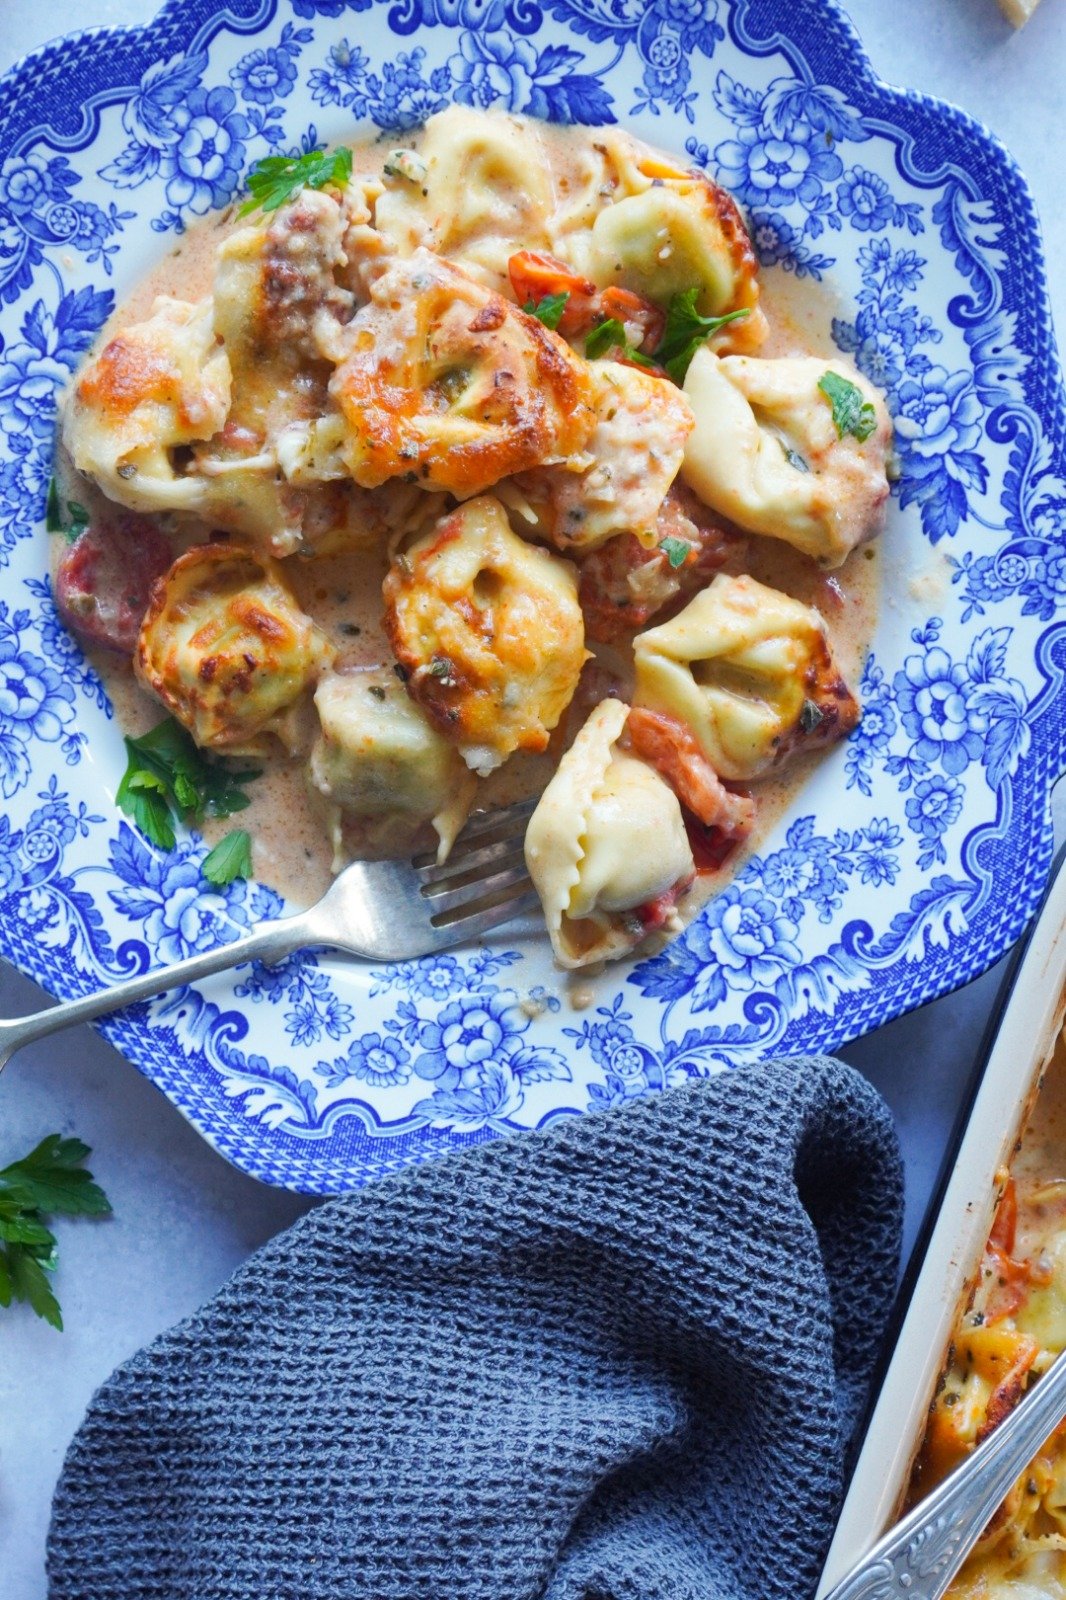 Delicious tortellini pieces covered in tomato sauce and spices to give you a Creamy Tomato Garlic Tortellini Bake